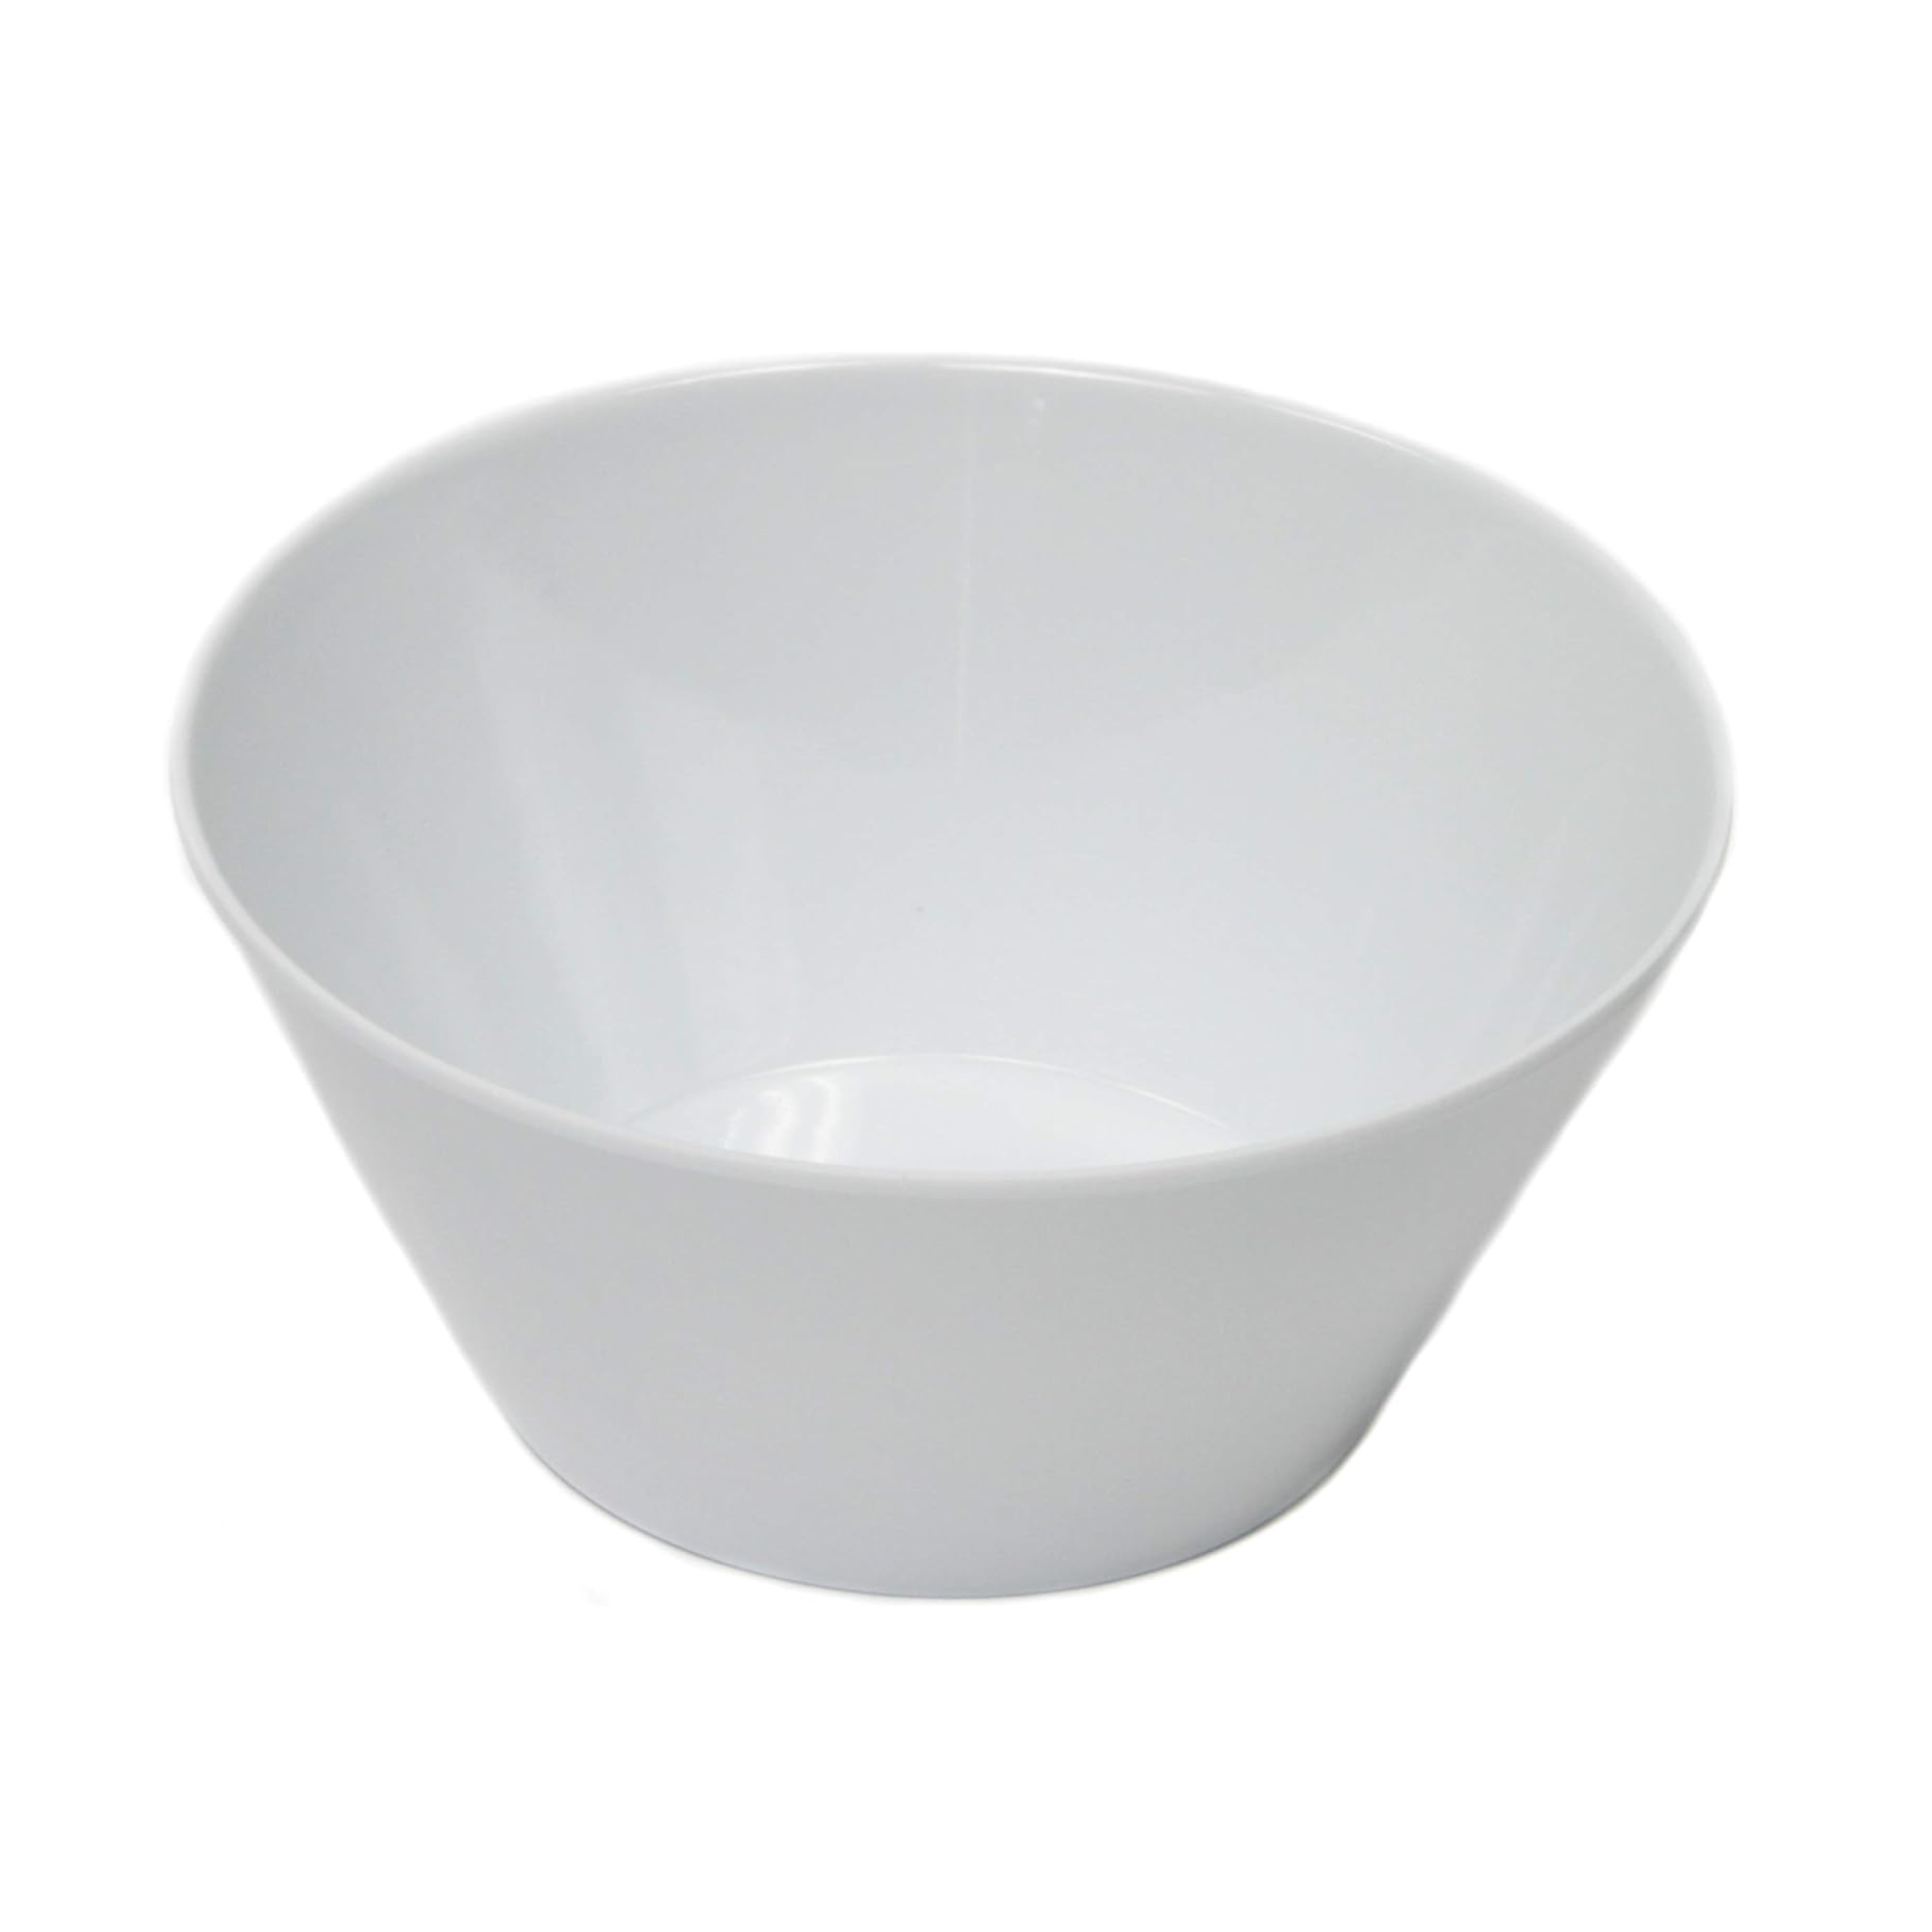 Chef Craft Select Salad Bowl, 6 inch diameter 20 ounce capacity